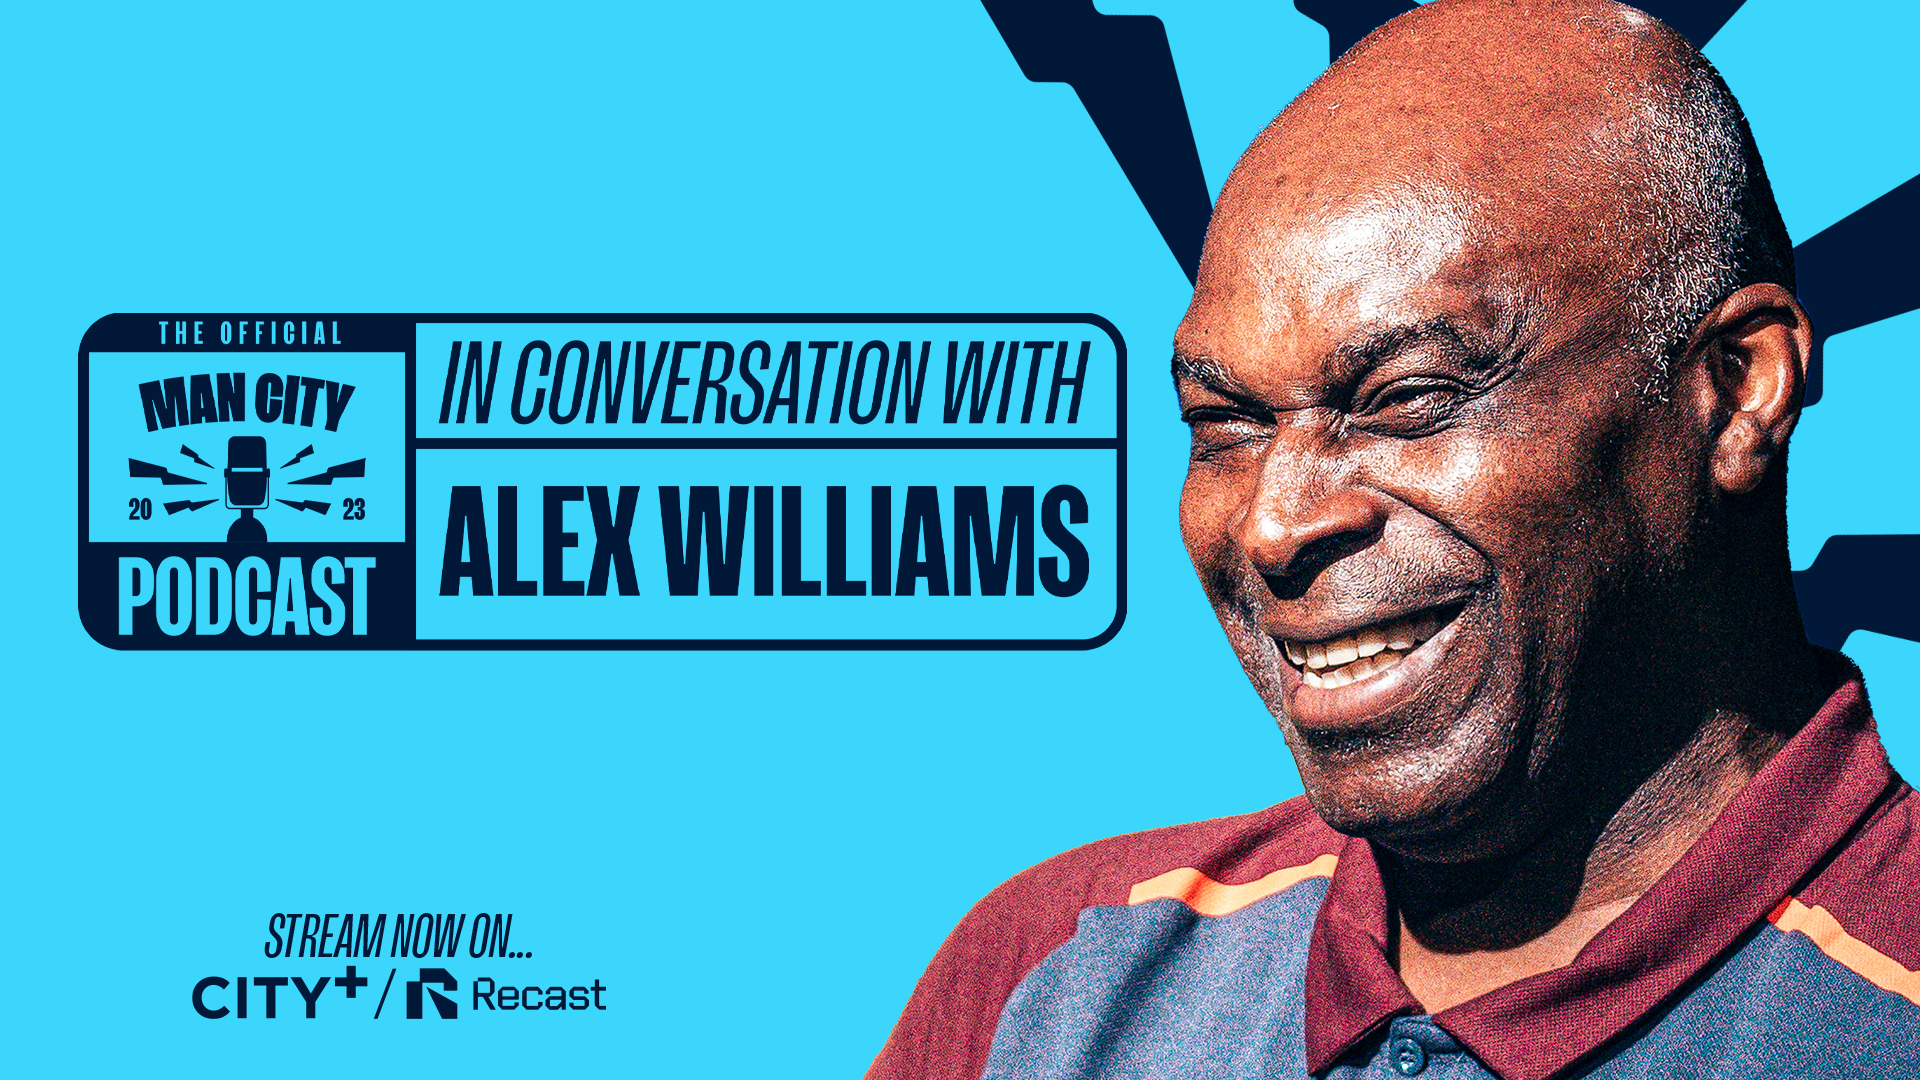 In conversation with Alex Williams | Man City podcast